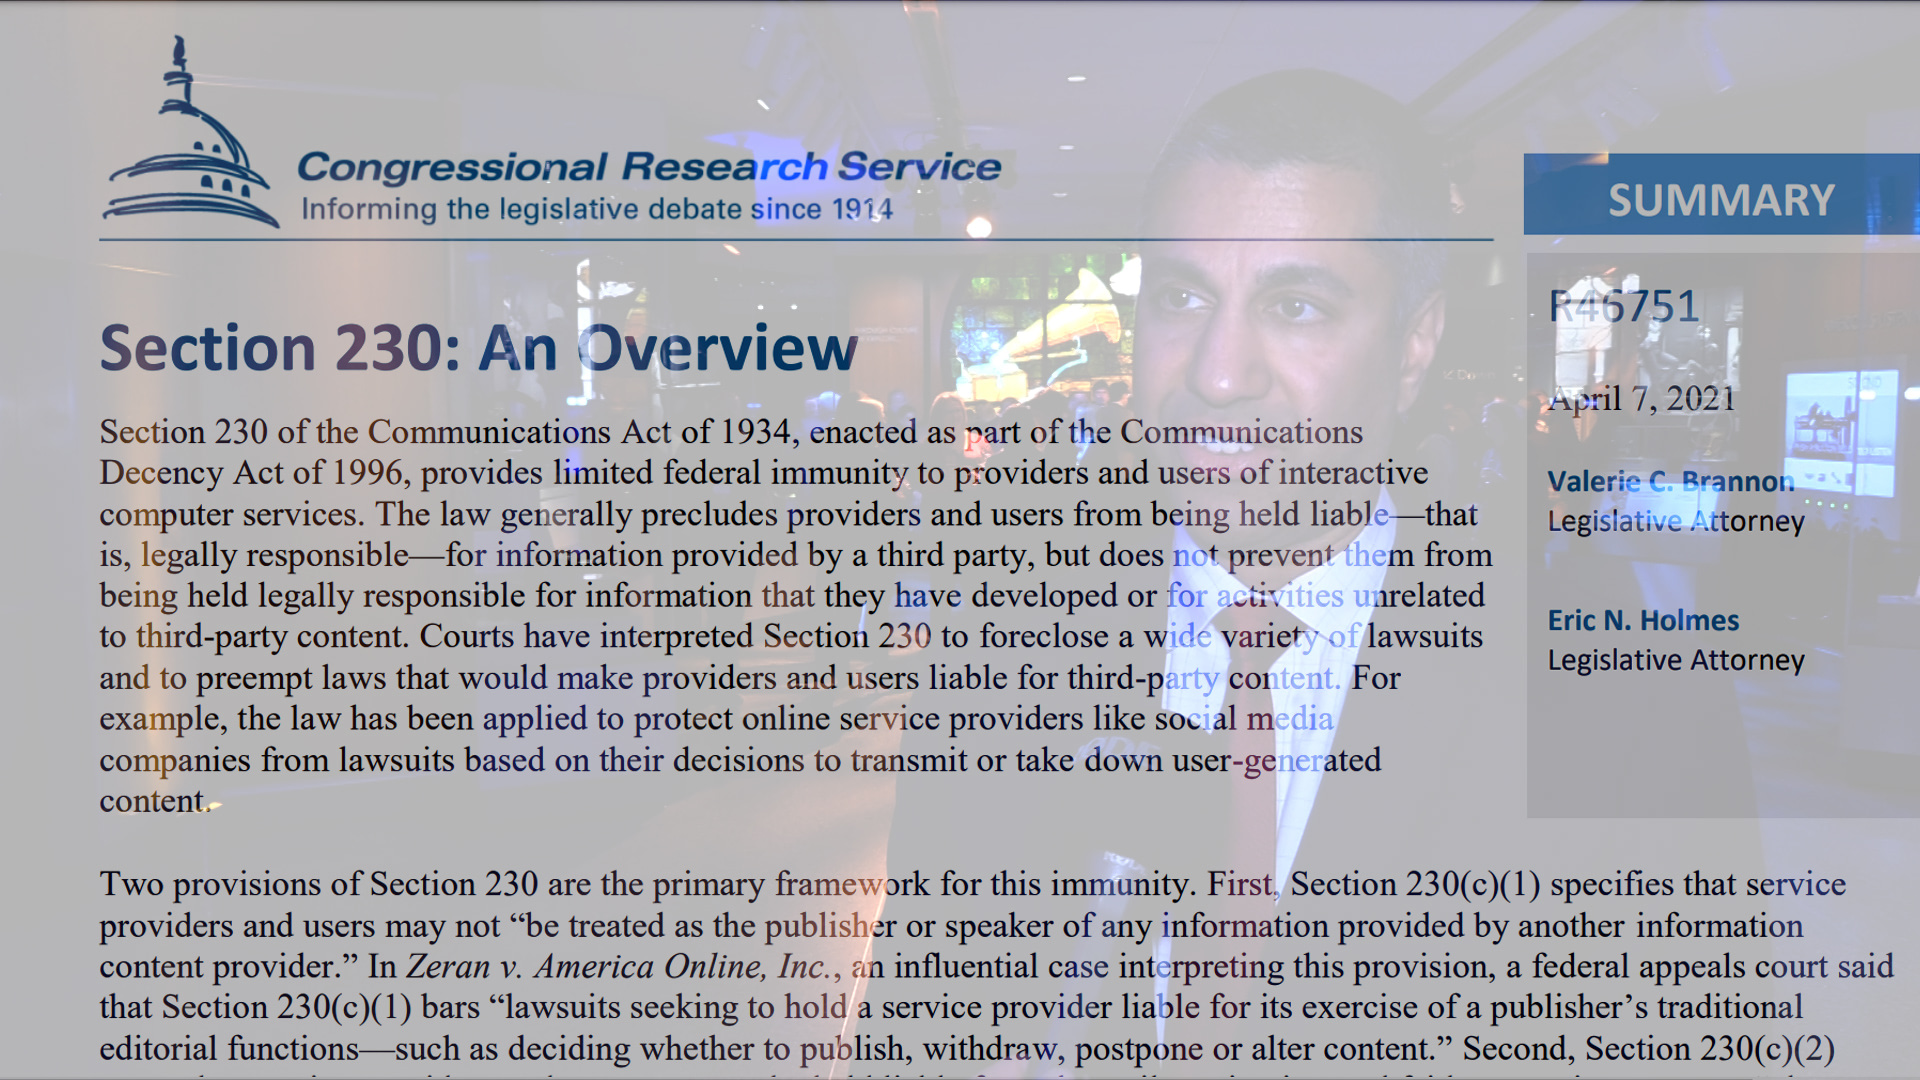 An image of Ajit Pai overlaid onto the CRS report on Section 230 of the Telecom Act.